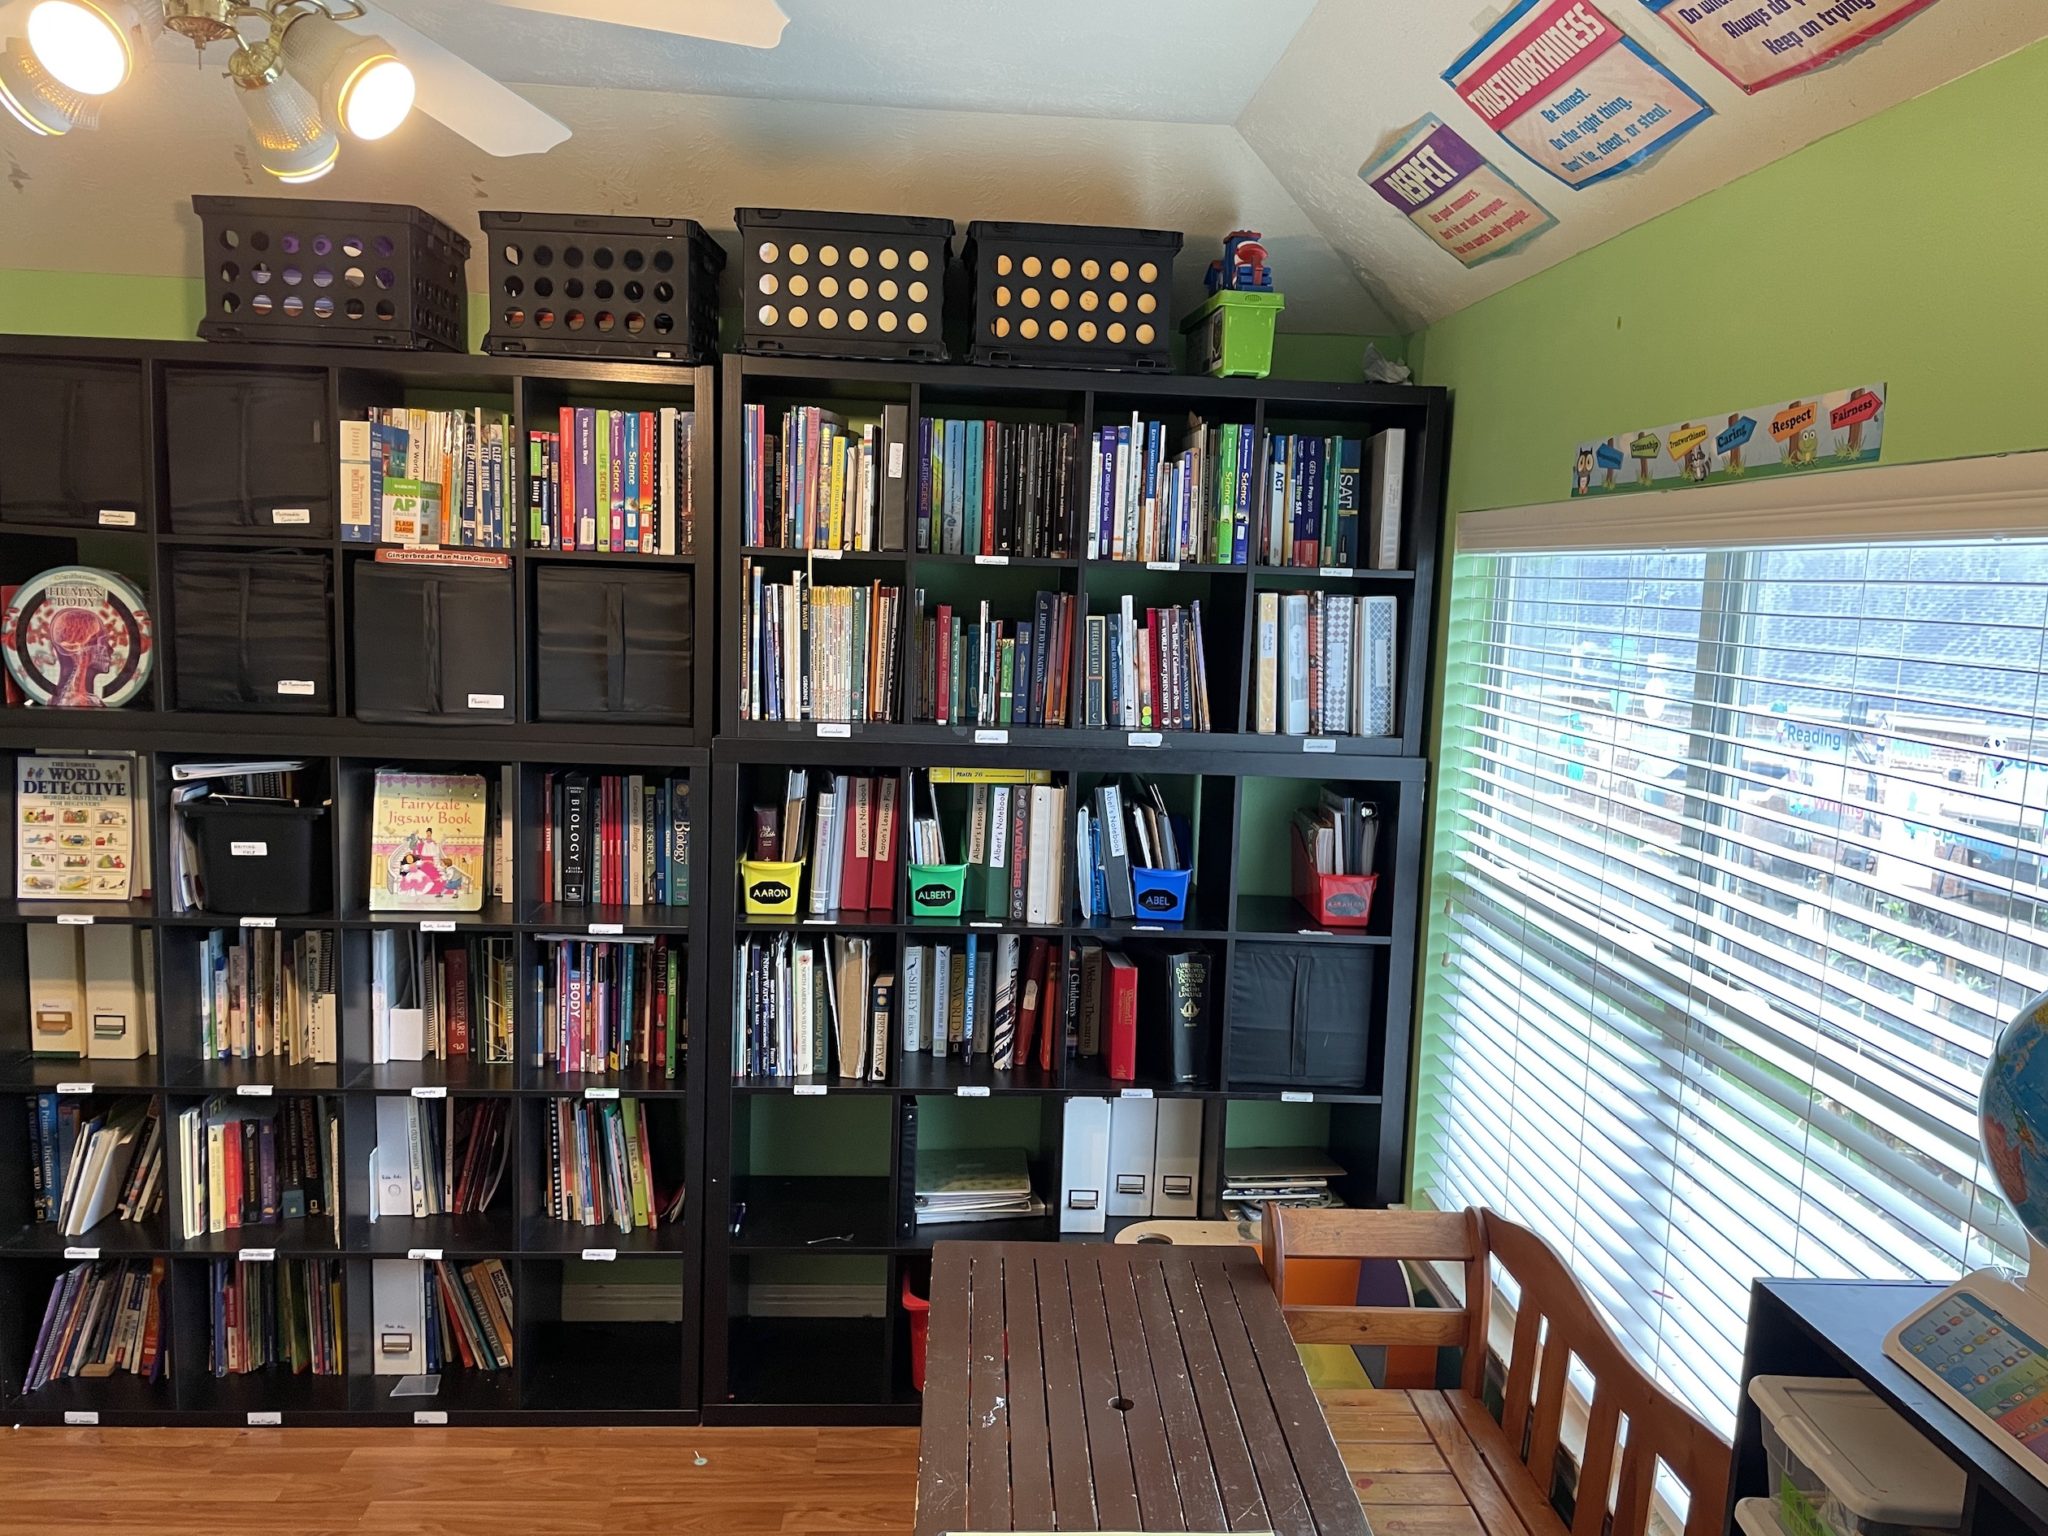 Most of our school room furniture we have purchased from IKEA. The cubicle model KALLAX bookshelves are our favorite!